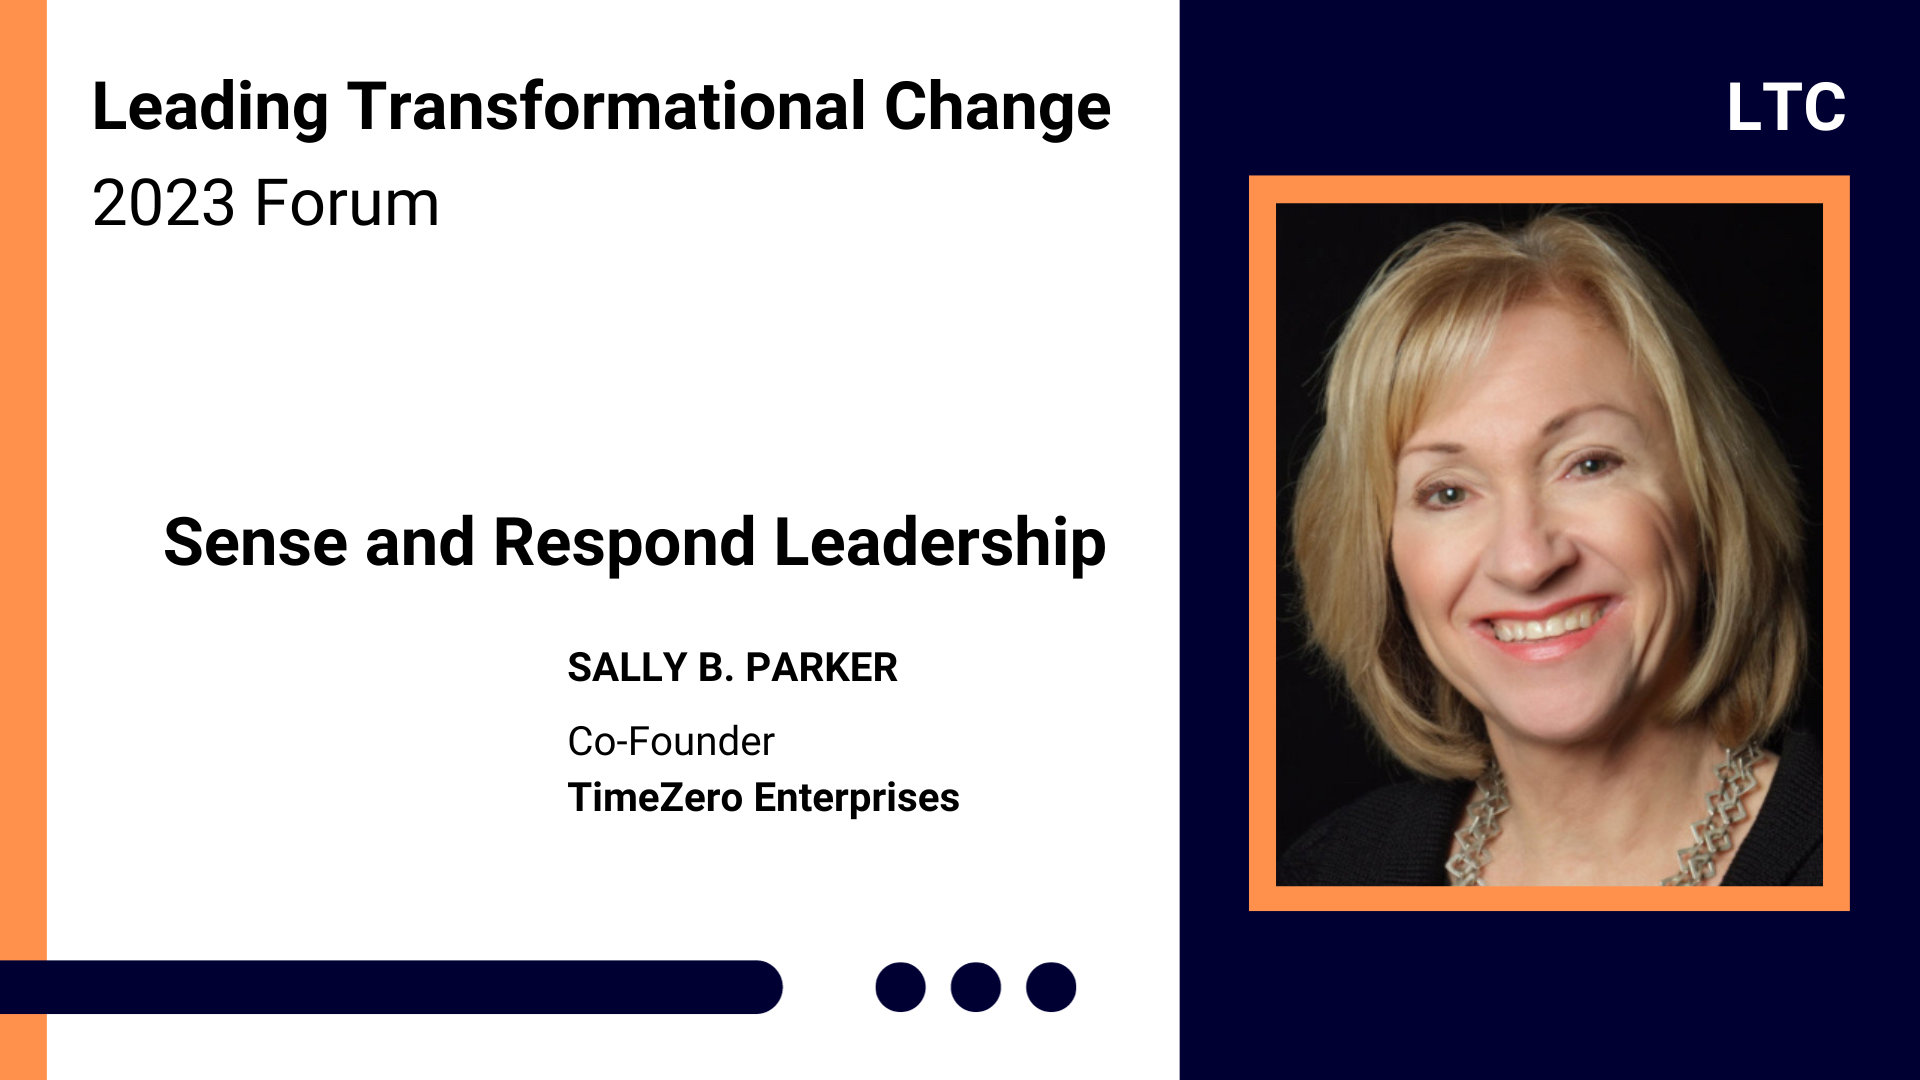 Sally B. Parker at the 2023 LTC Forum